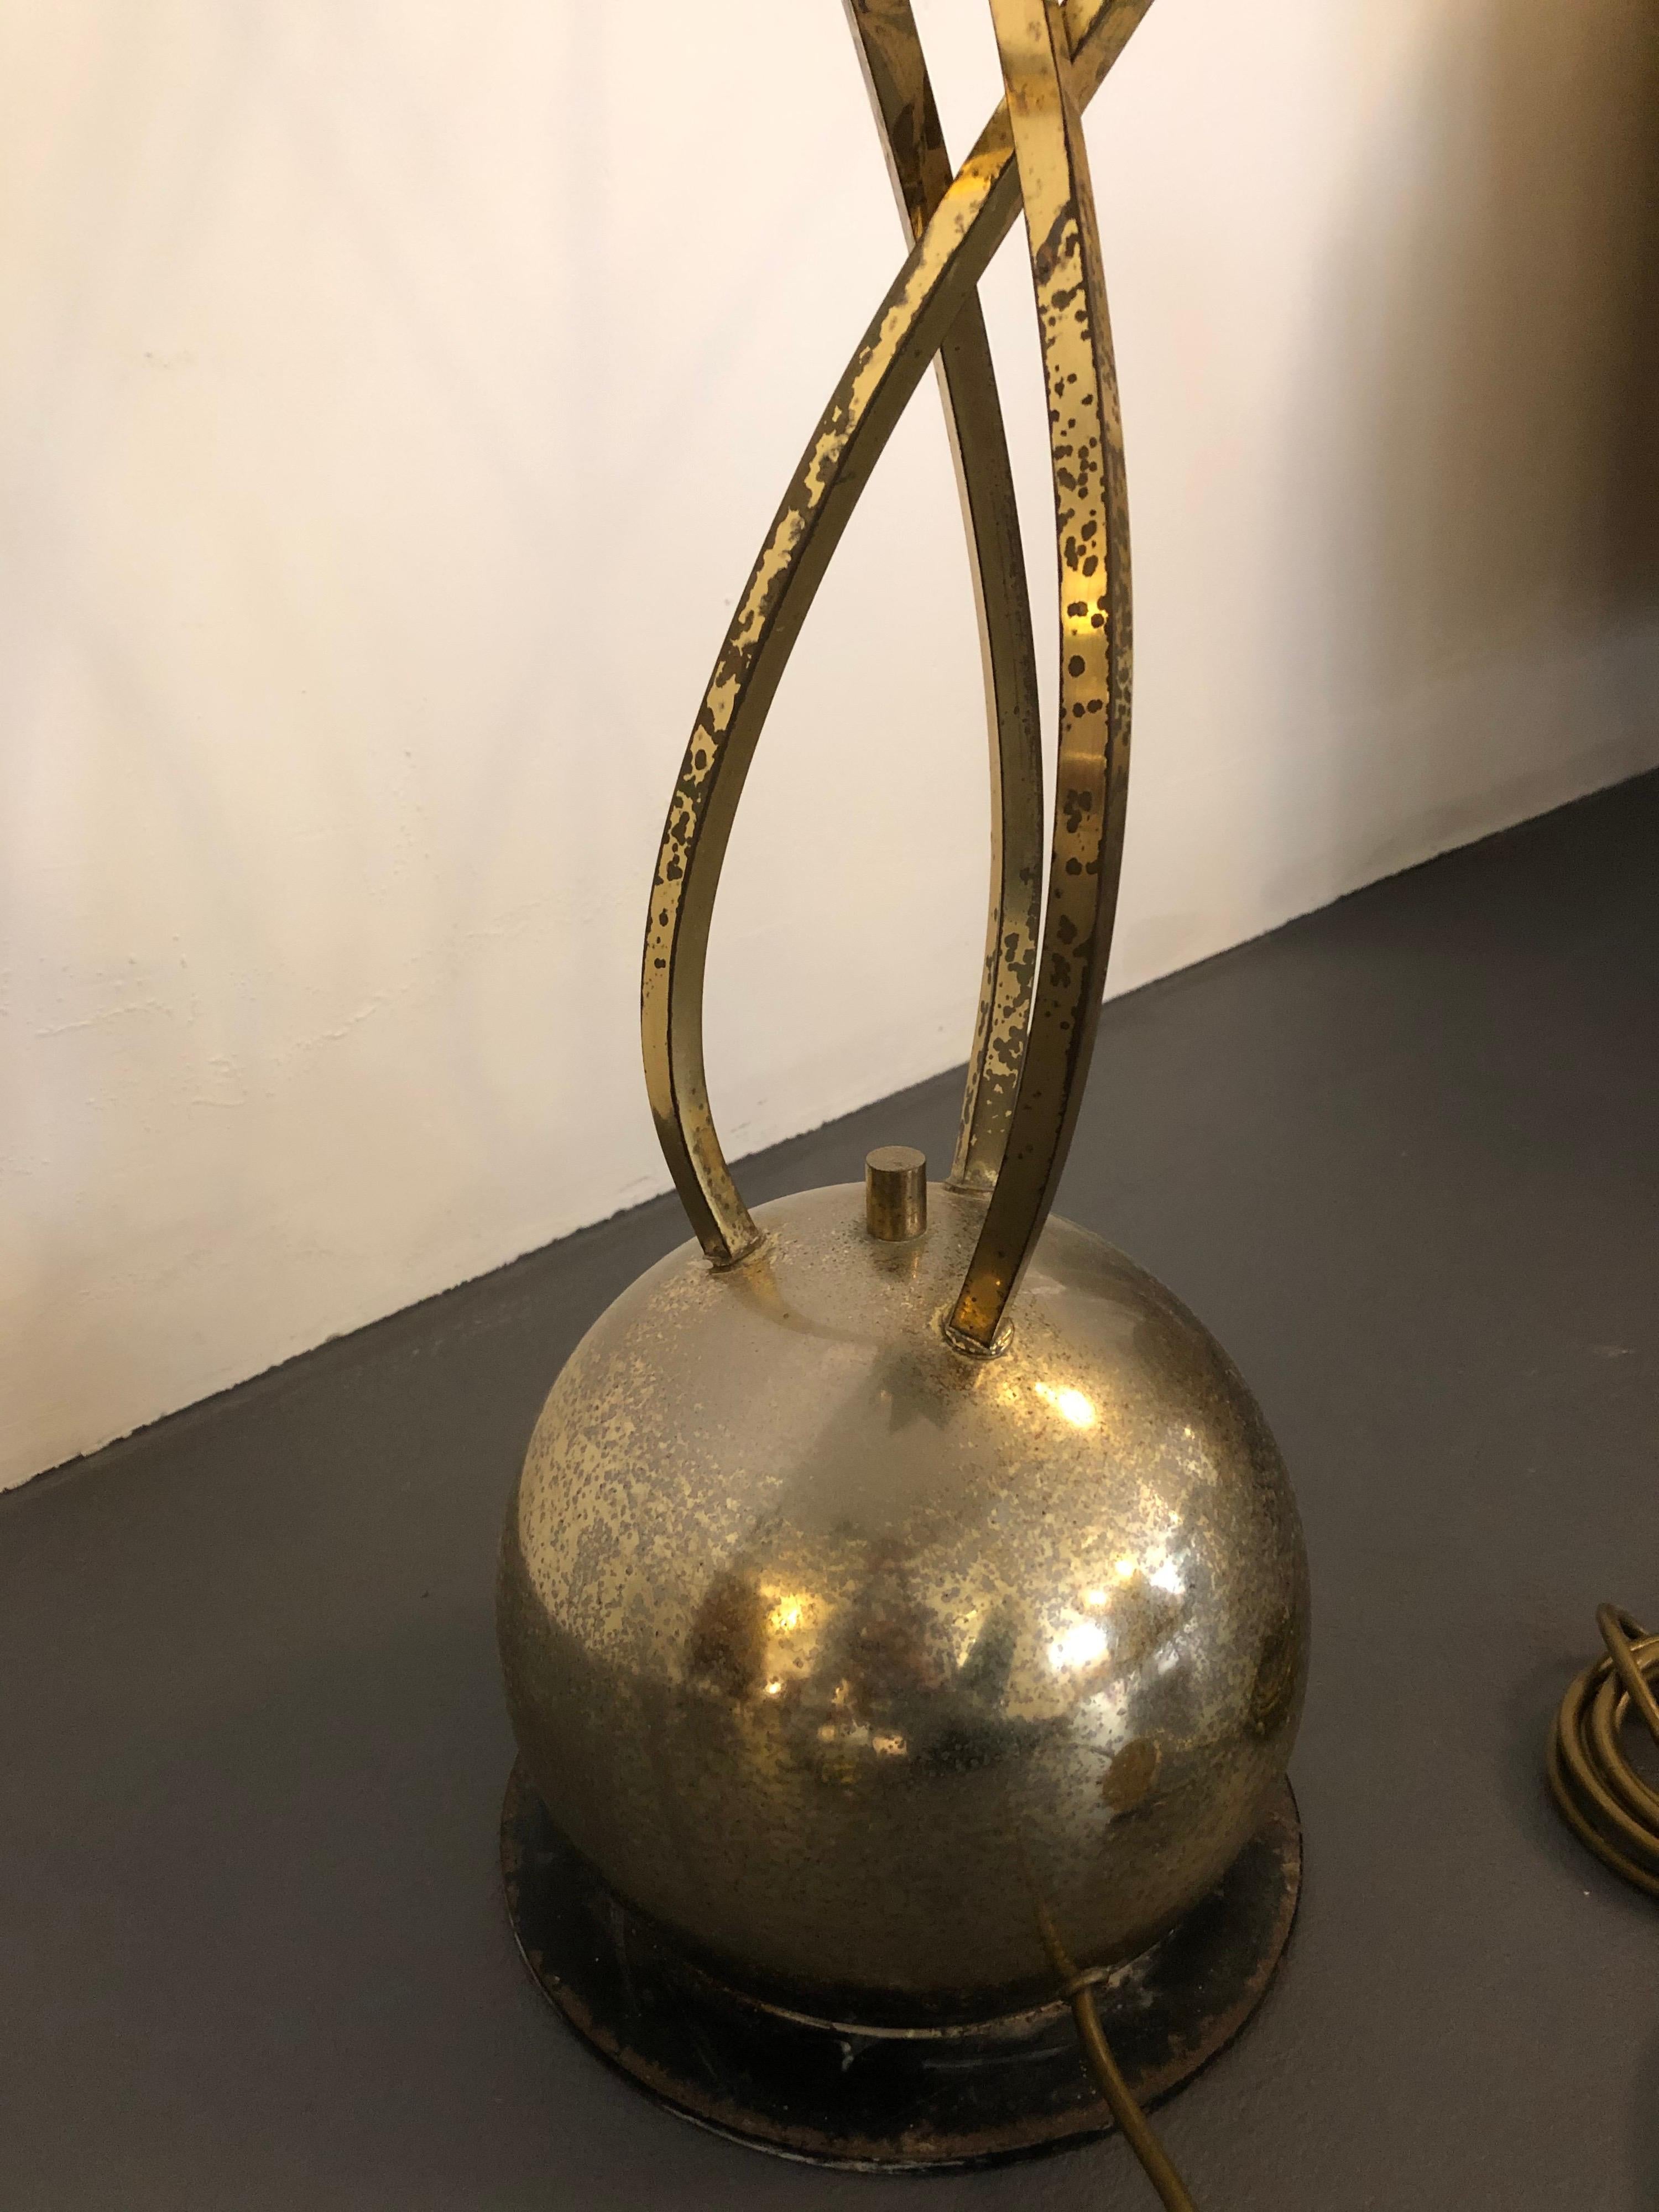 Rare floor lamp designed and produced by the Italian designer Tommaso Barbi during the 1970s. It has been left in original vintage condition with patina and spots on the brass.